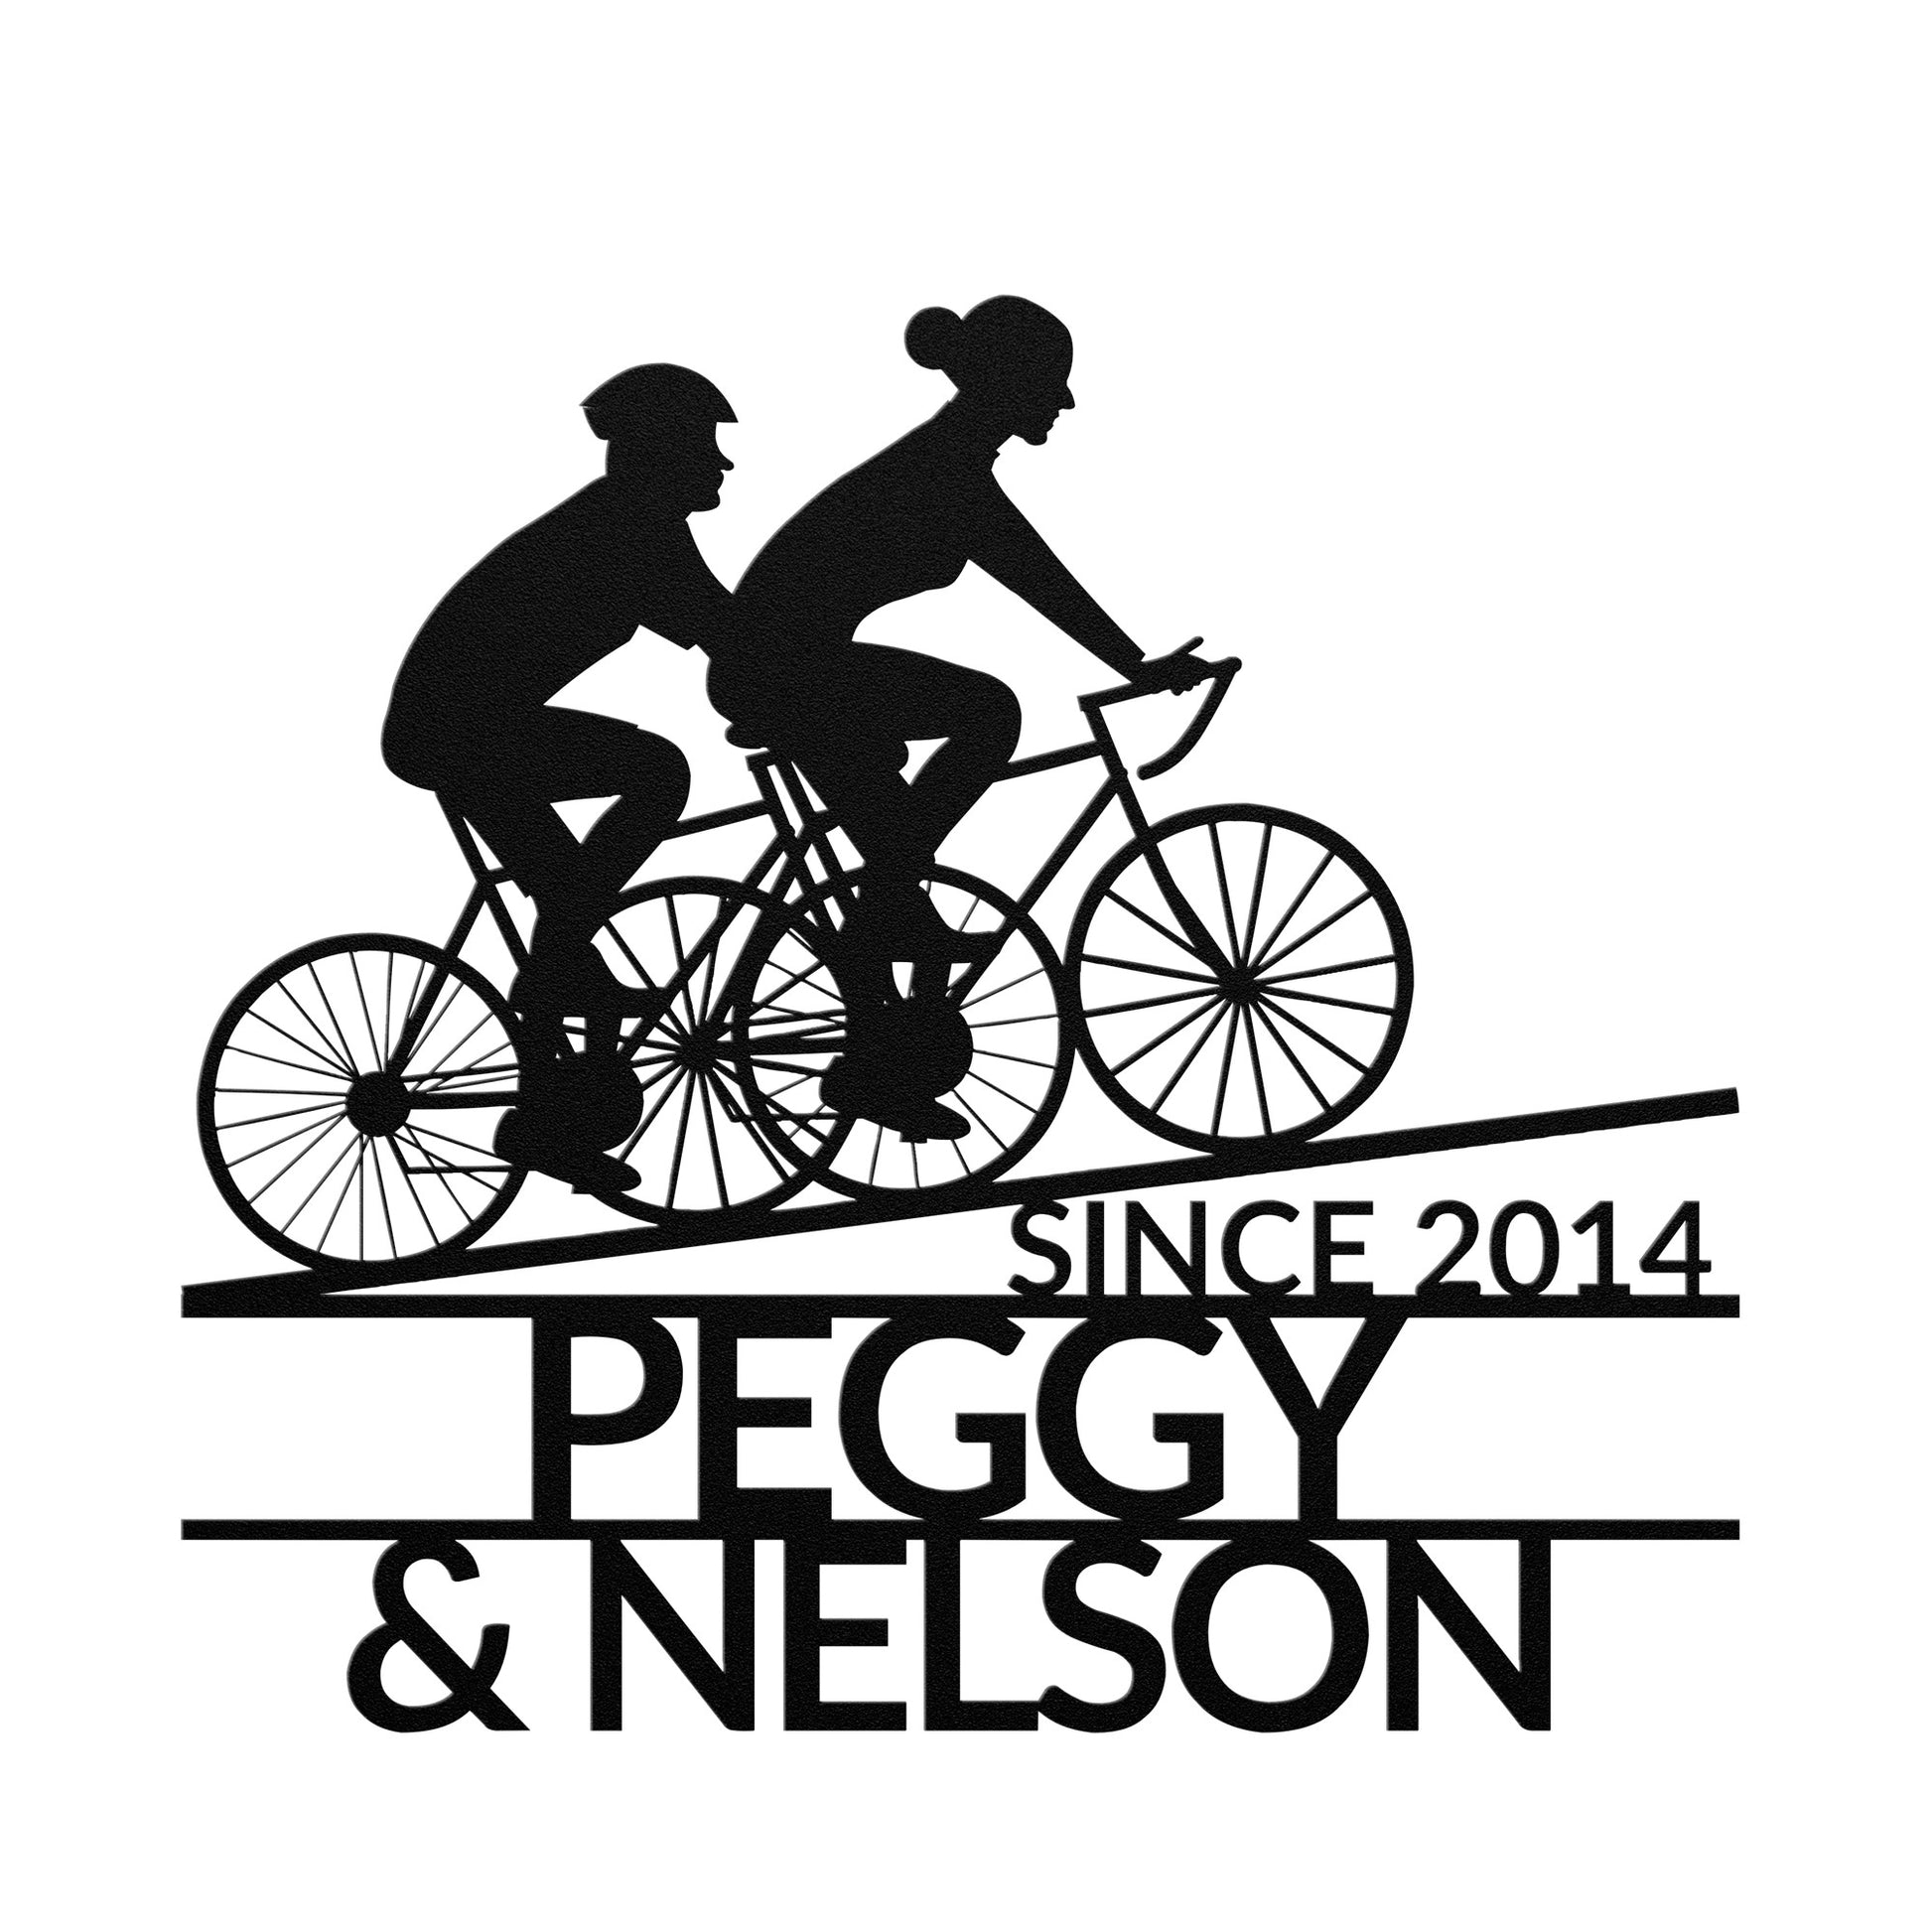 A black silhouette of a couple on a bicycle, perfect for couples who love to cycle together. Personalize this piece with engraved names and year established to create a unique and meaningful teelaunch Personalized Couple Cycling Uphill Metal Wall Art Sign.